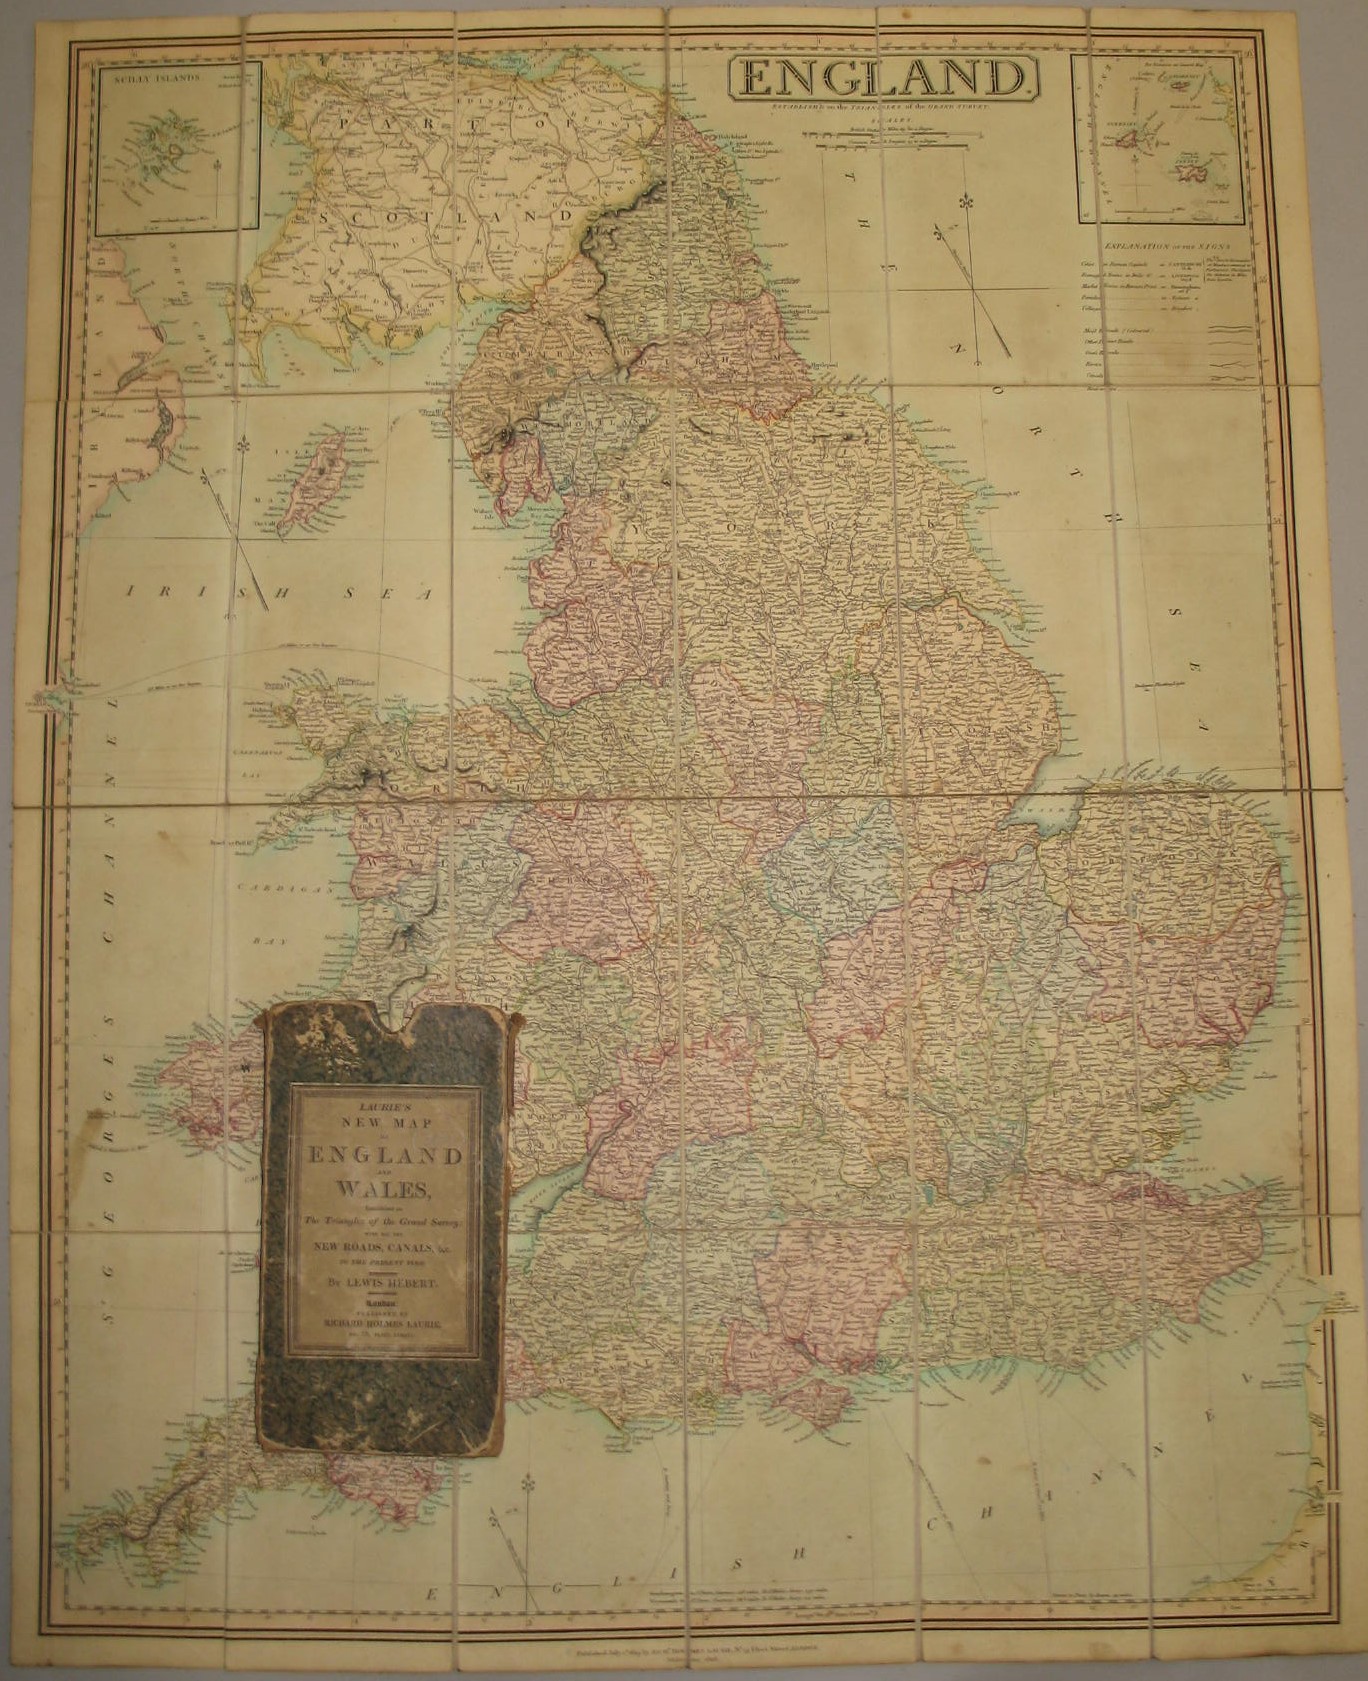 [MAP] Laurie's New Map of England & Wales," folding h-col'd linen-backed map, slipcase, 31.5 x 25